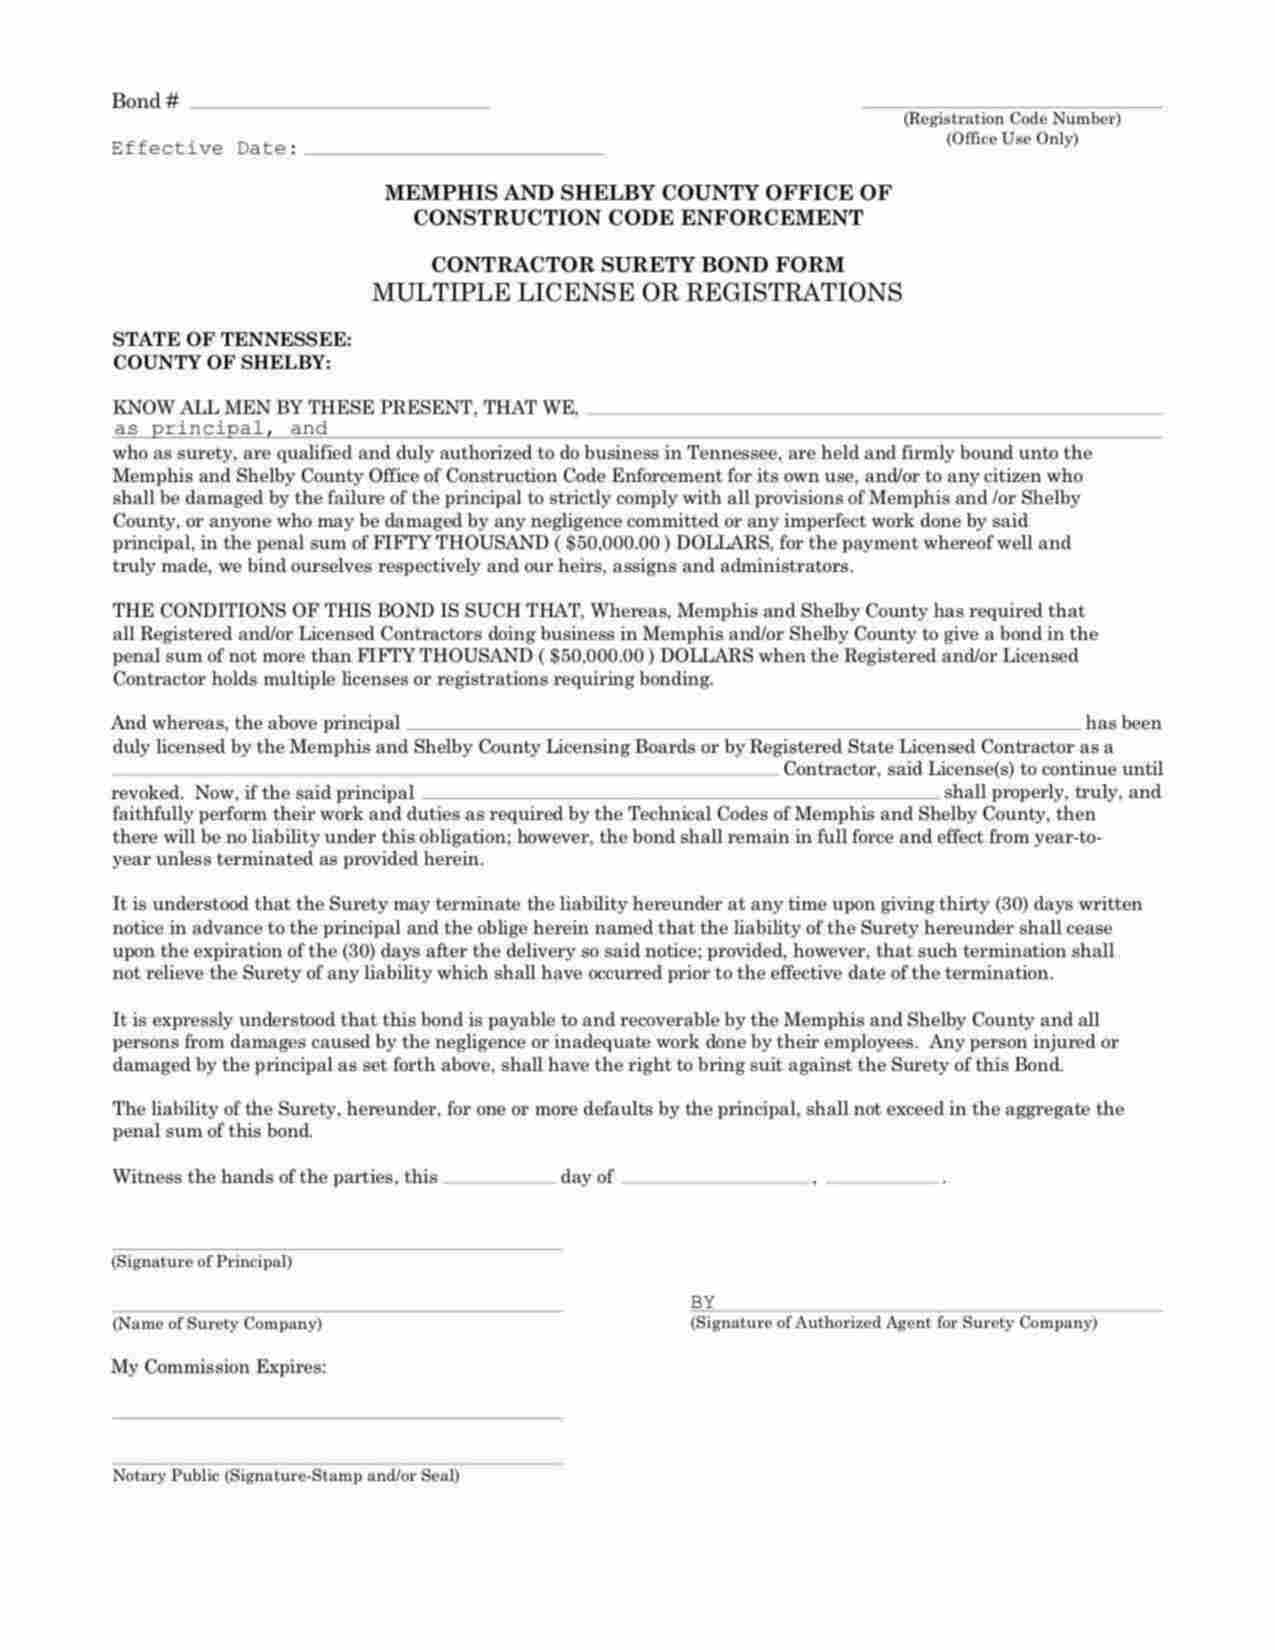 Tennessee Consolidated Contractor - Multiple Licenses or Registrations Bond Form